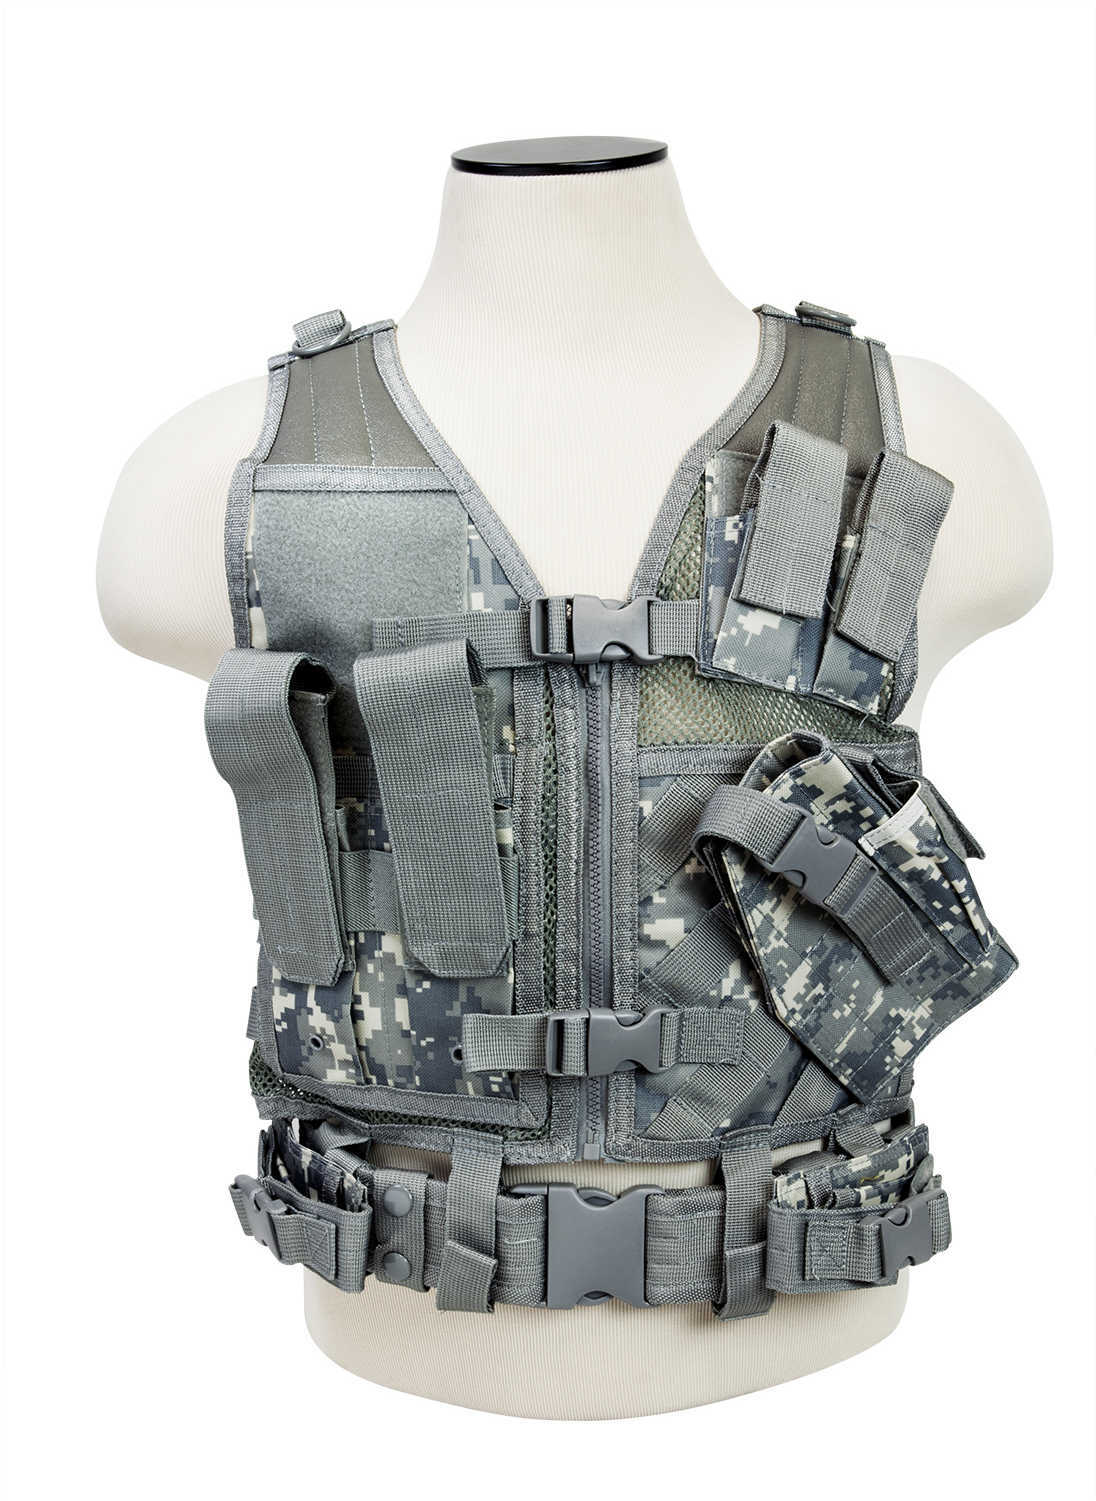 NCSTAR Tactical Vest Nylon Digital Camo Size XS- Small Fully Adjustable PALS Webbing Pistol Mag Pouches Rifle